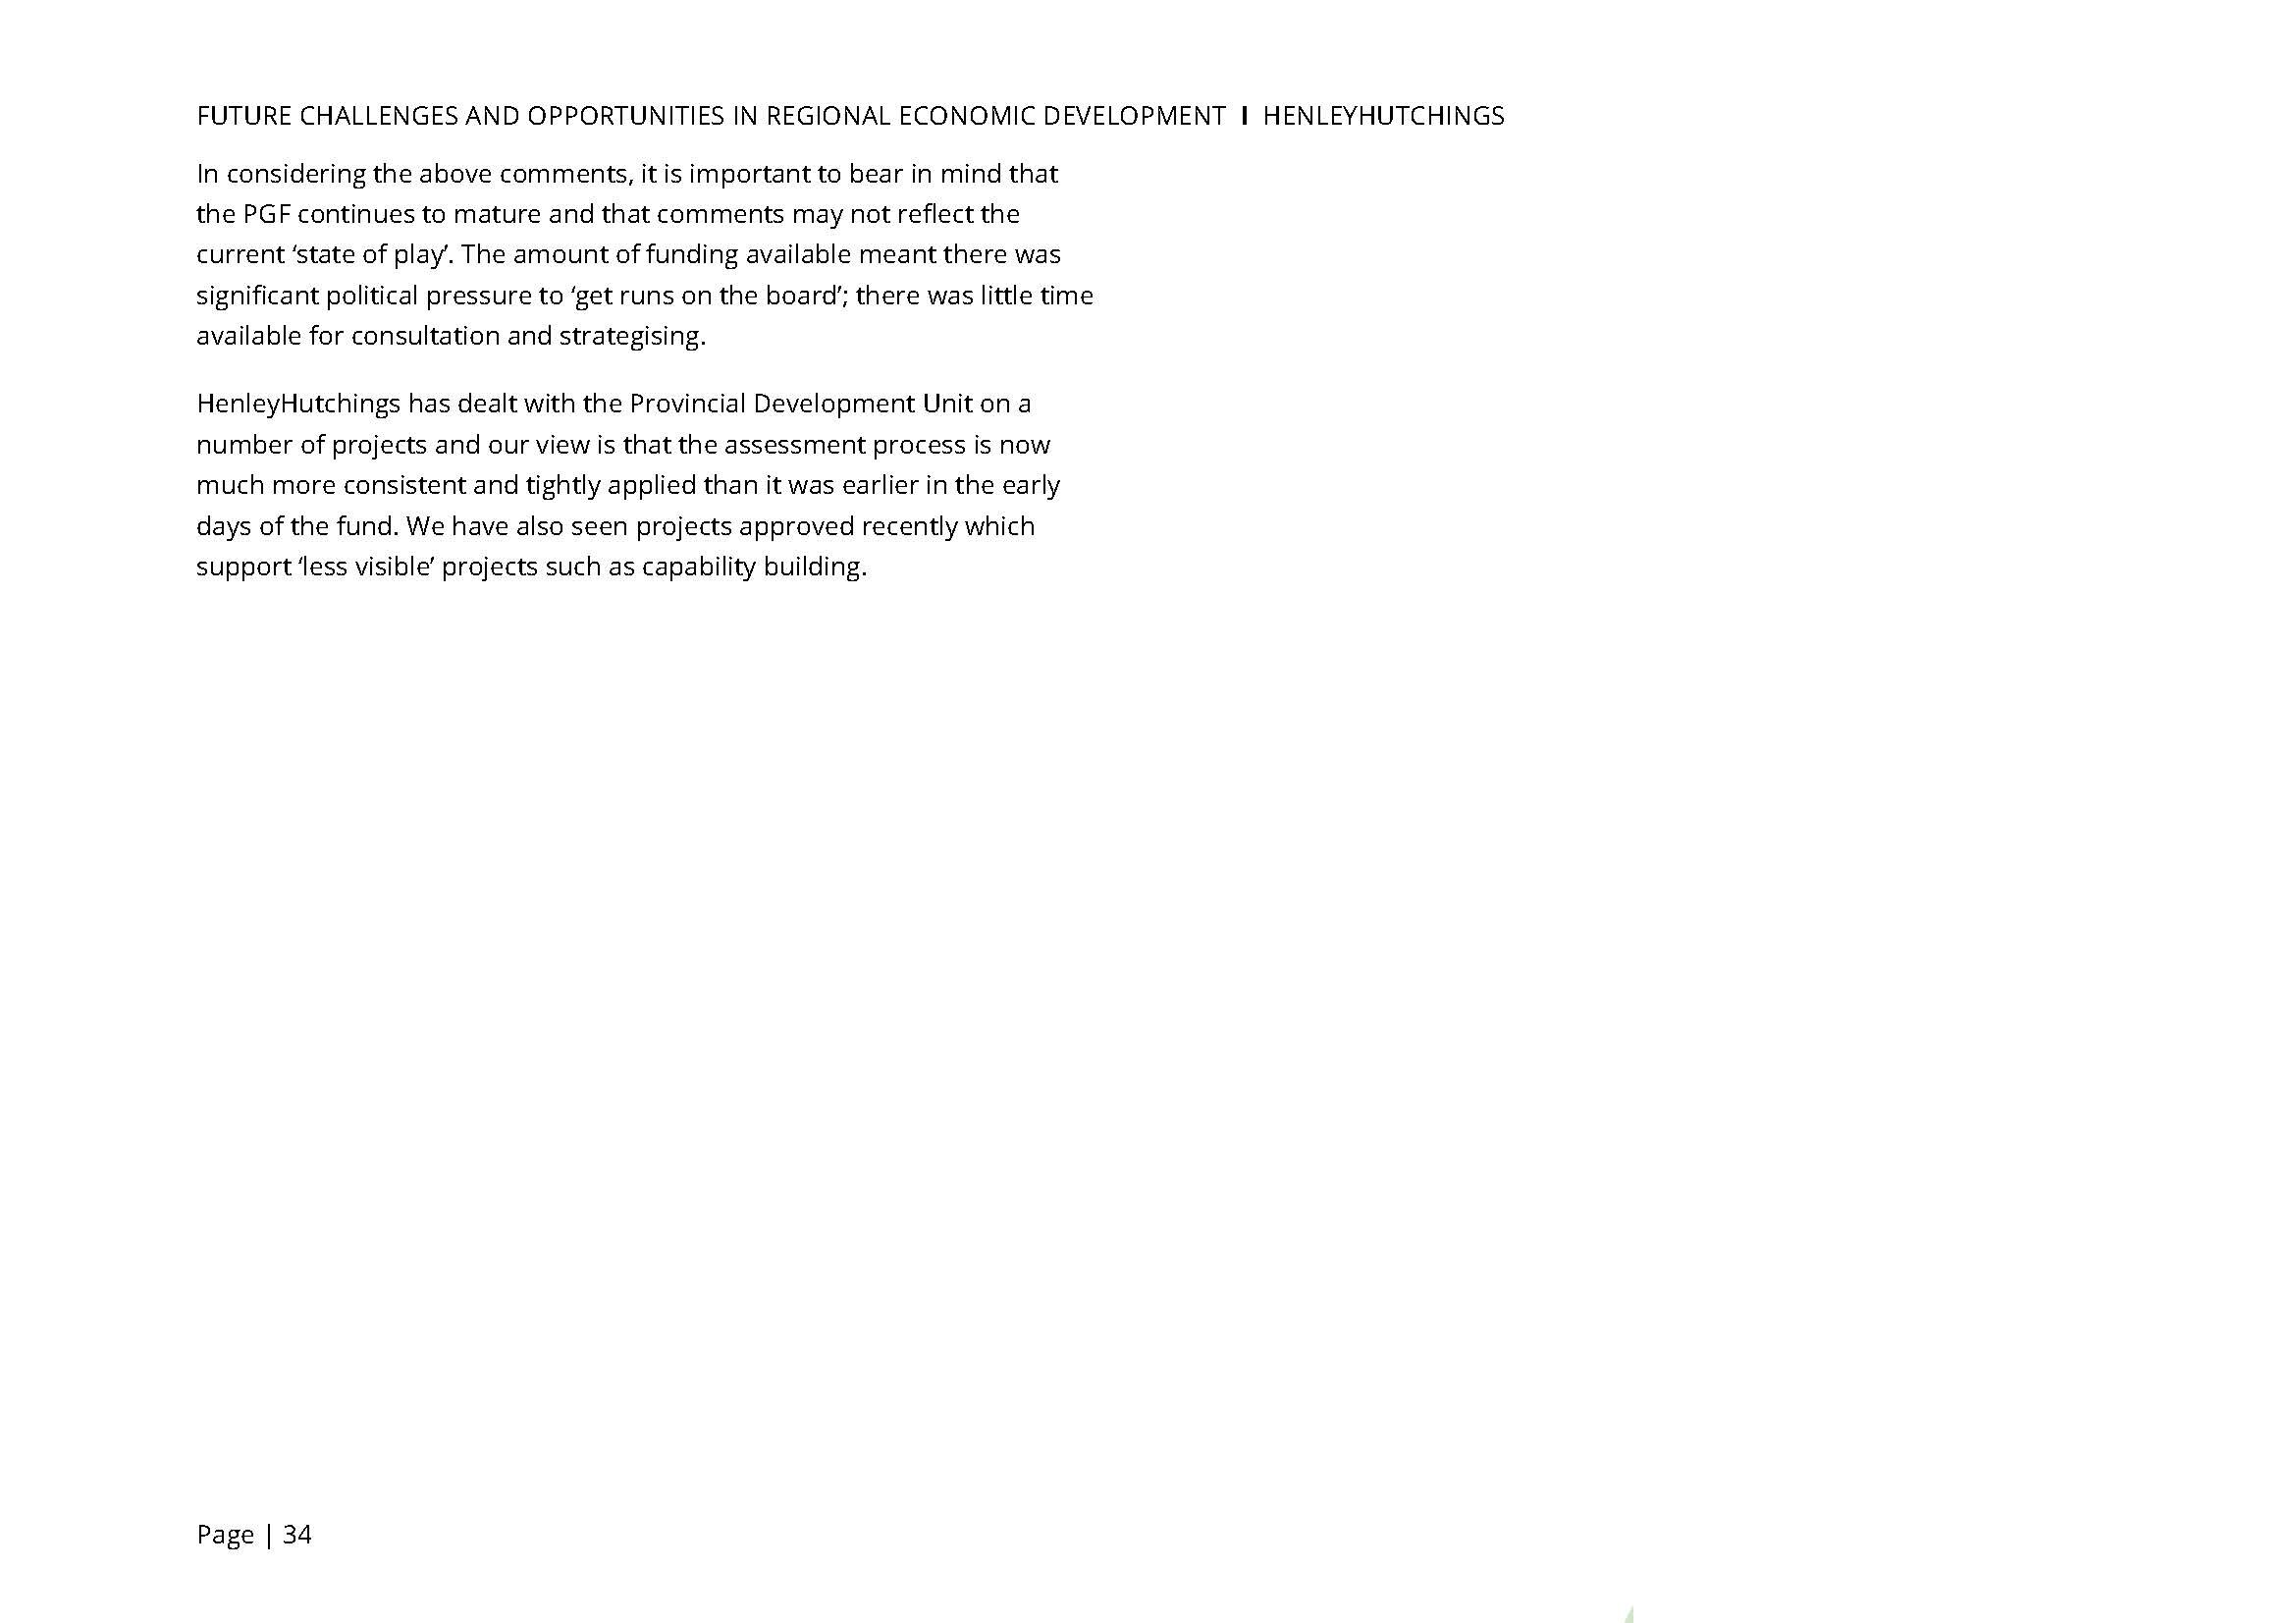 Future Challenges and Opportunities in Economic Development, HenleyHutchings TEST_Page_34.jpg